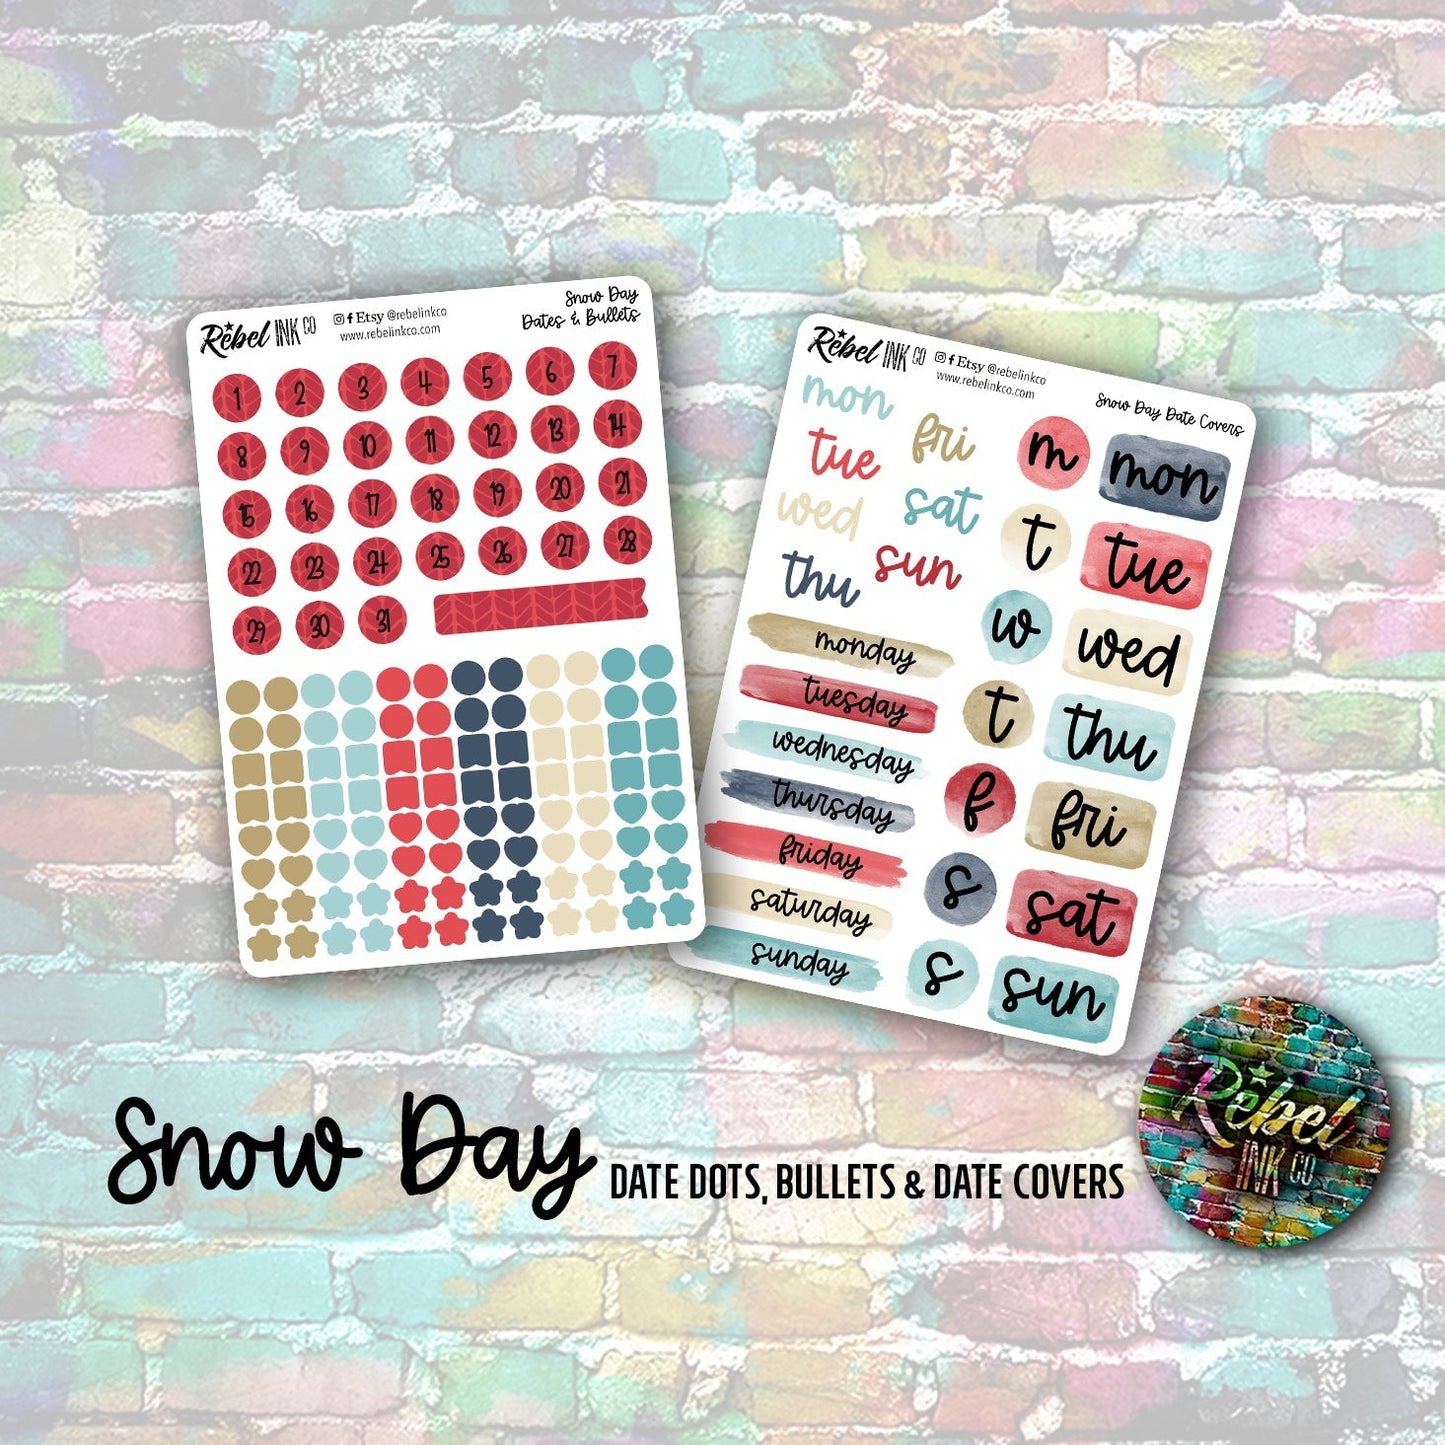 Snow Day - Date Dots & Bullets and Date Covers